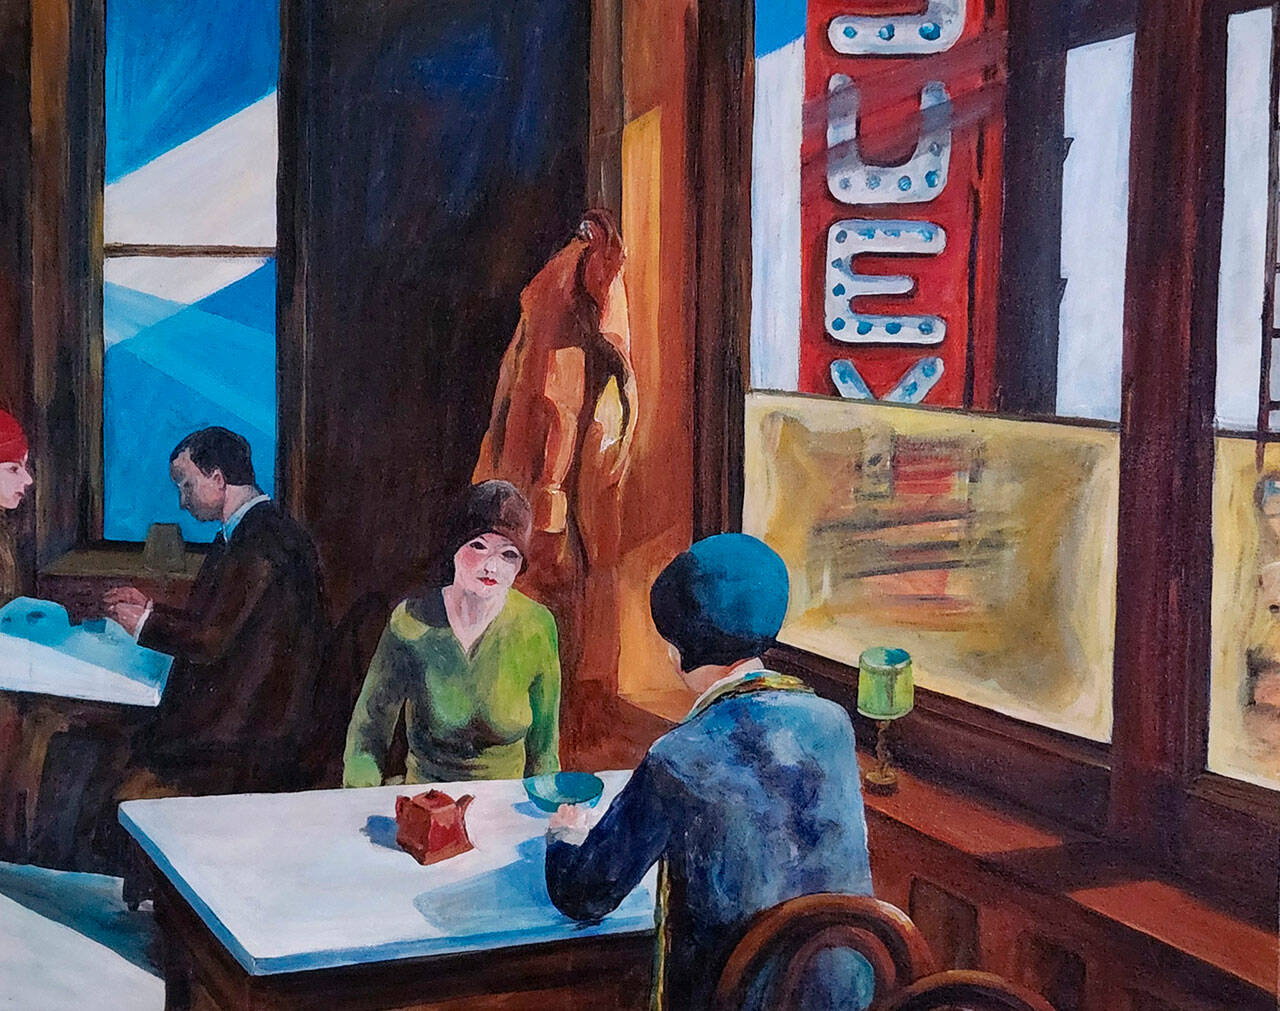 Artwork courtesy of Carrie Rodlend
“Chop Suey” (1929) by Edward Hopper is reimagined for Carrie Rodlend’s “A Taste of Art” show for the month of February in The Ramen Shop, 138 W. Washington St.